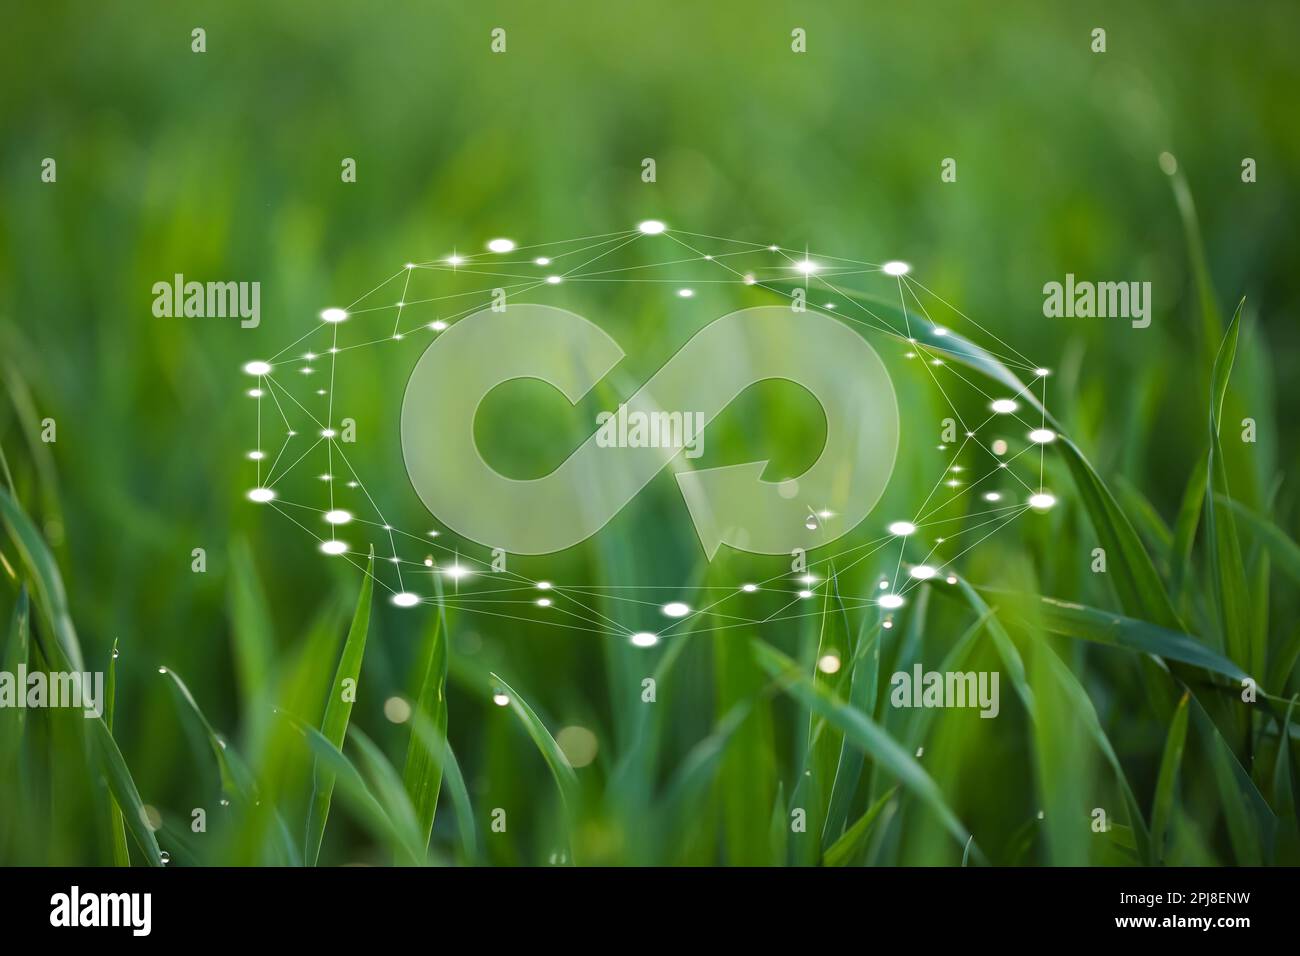 Circular economy concept. Green grass and illustration of infinity symbol Stock Photo